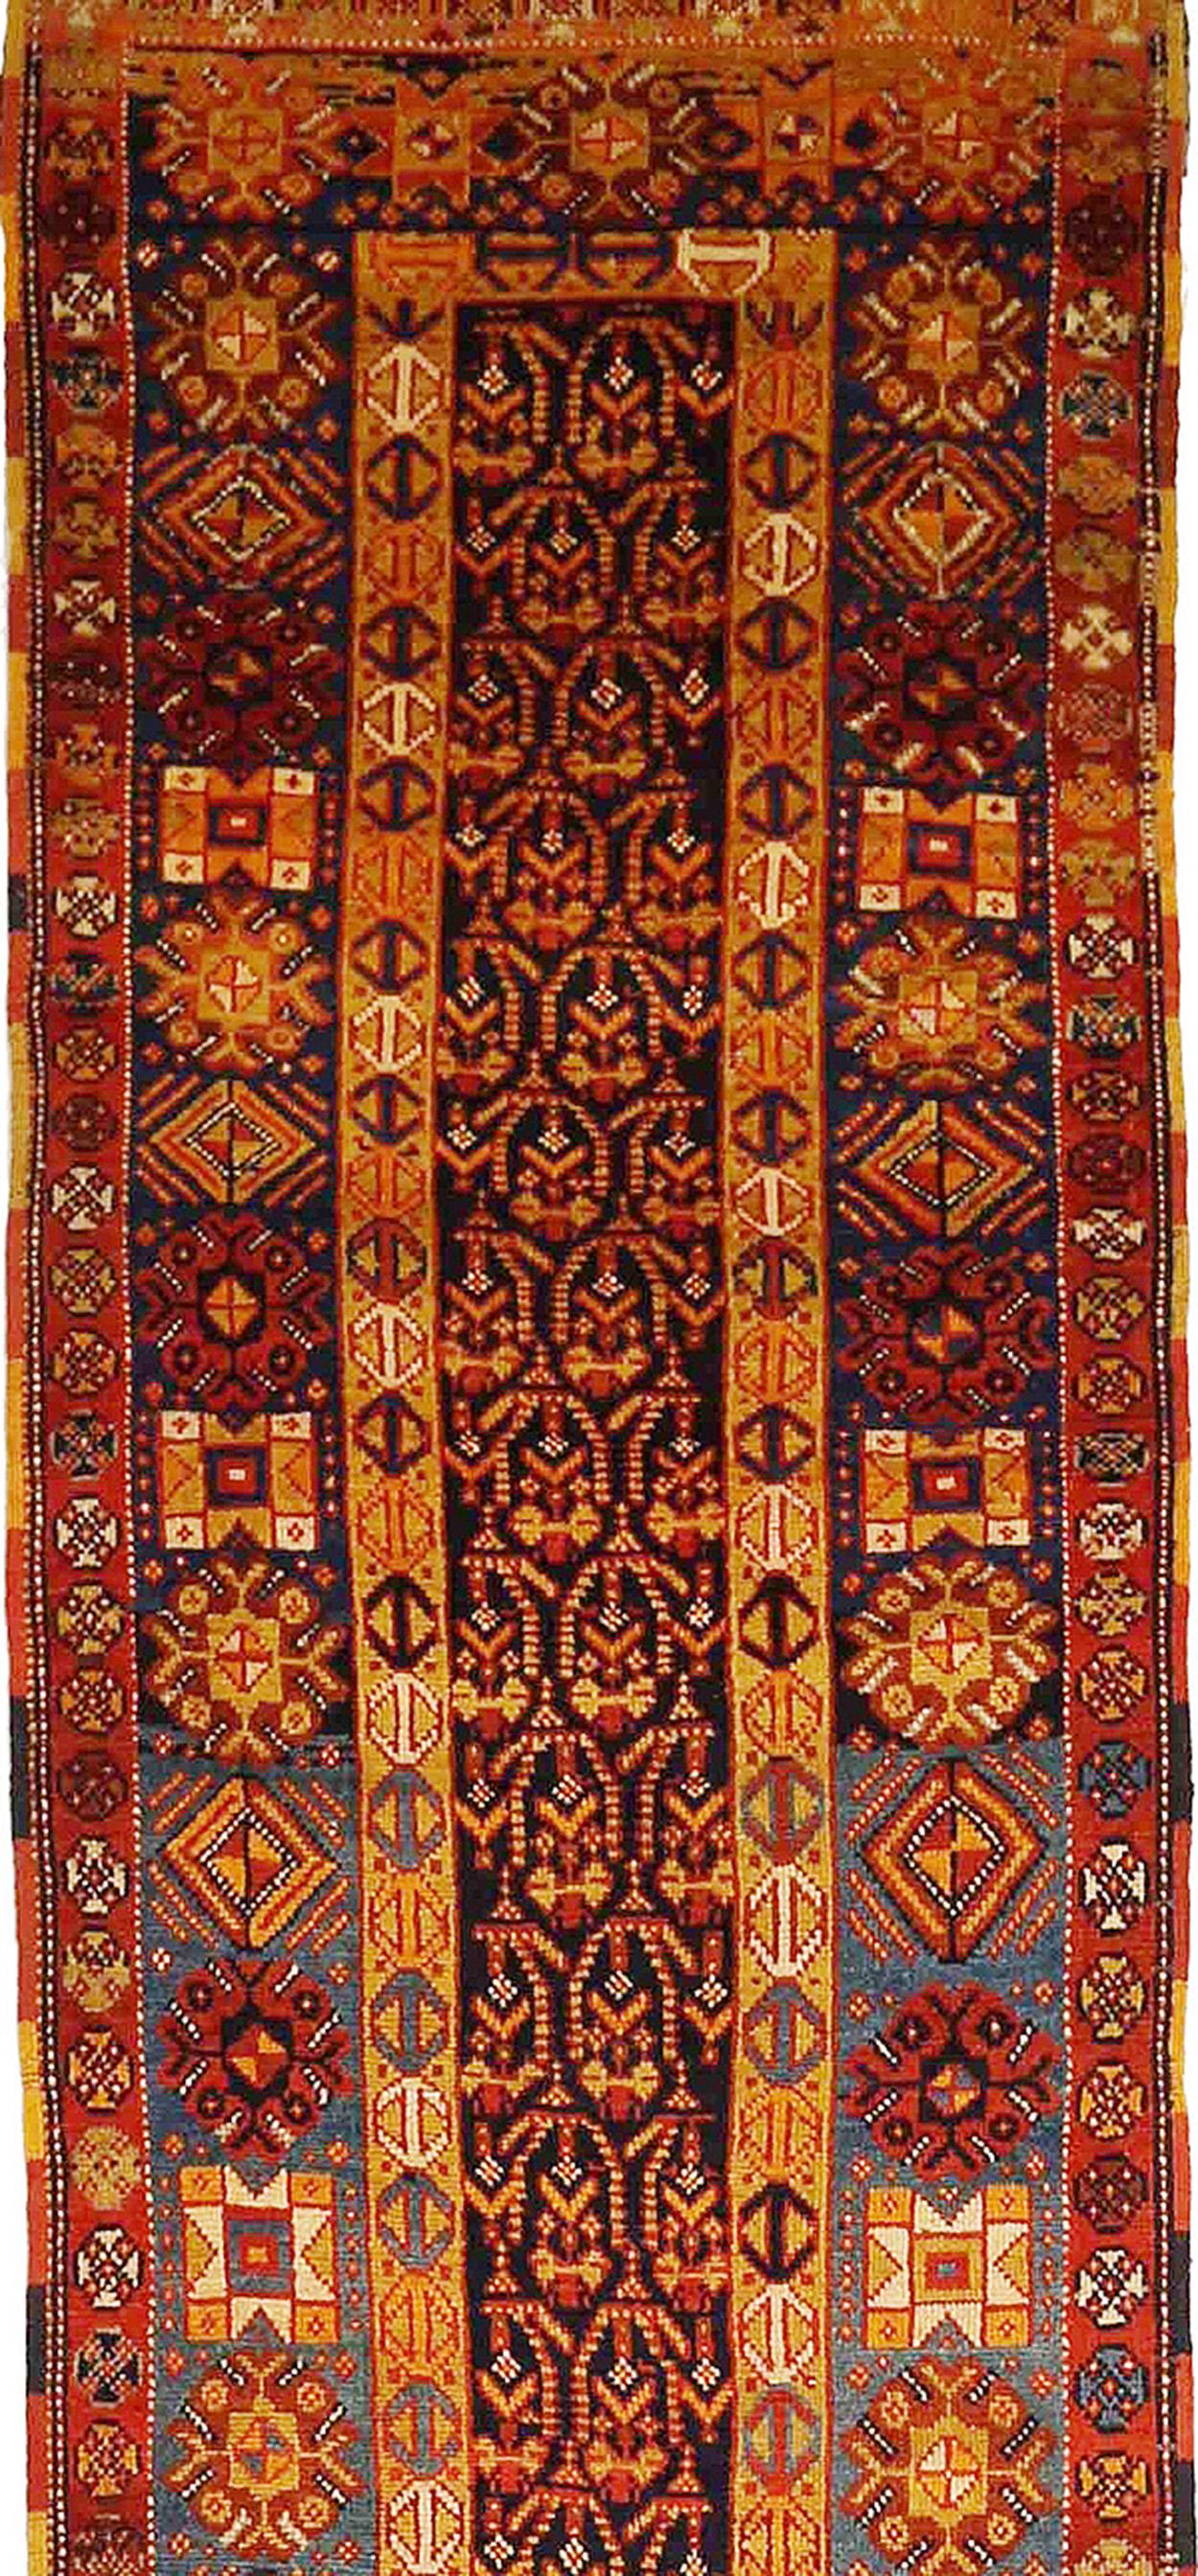 Antique Persian runner rug made of handwoven sheep’s wool of the finest quality. It’s colored with organic vegetable dyes that are certified safe for humans and pets alike. It features rows of flower medallion details all-over associated with Oushak